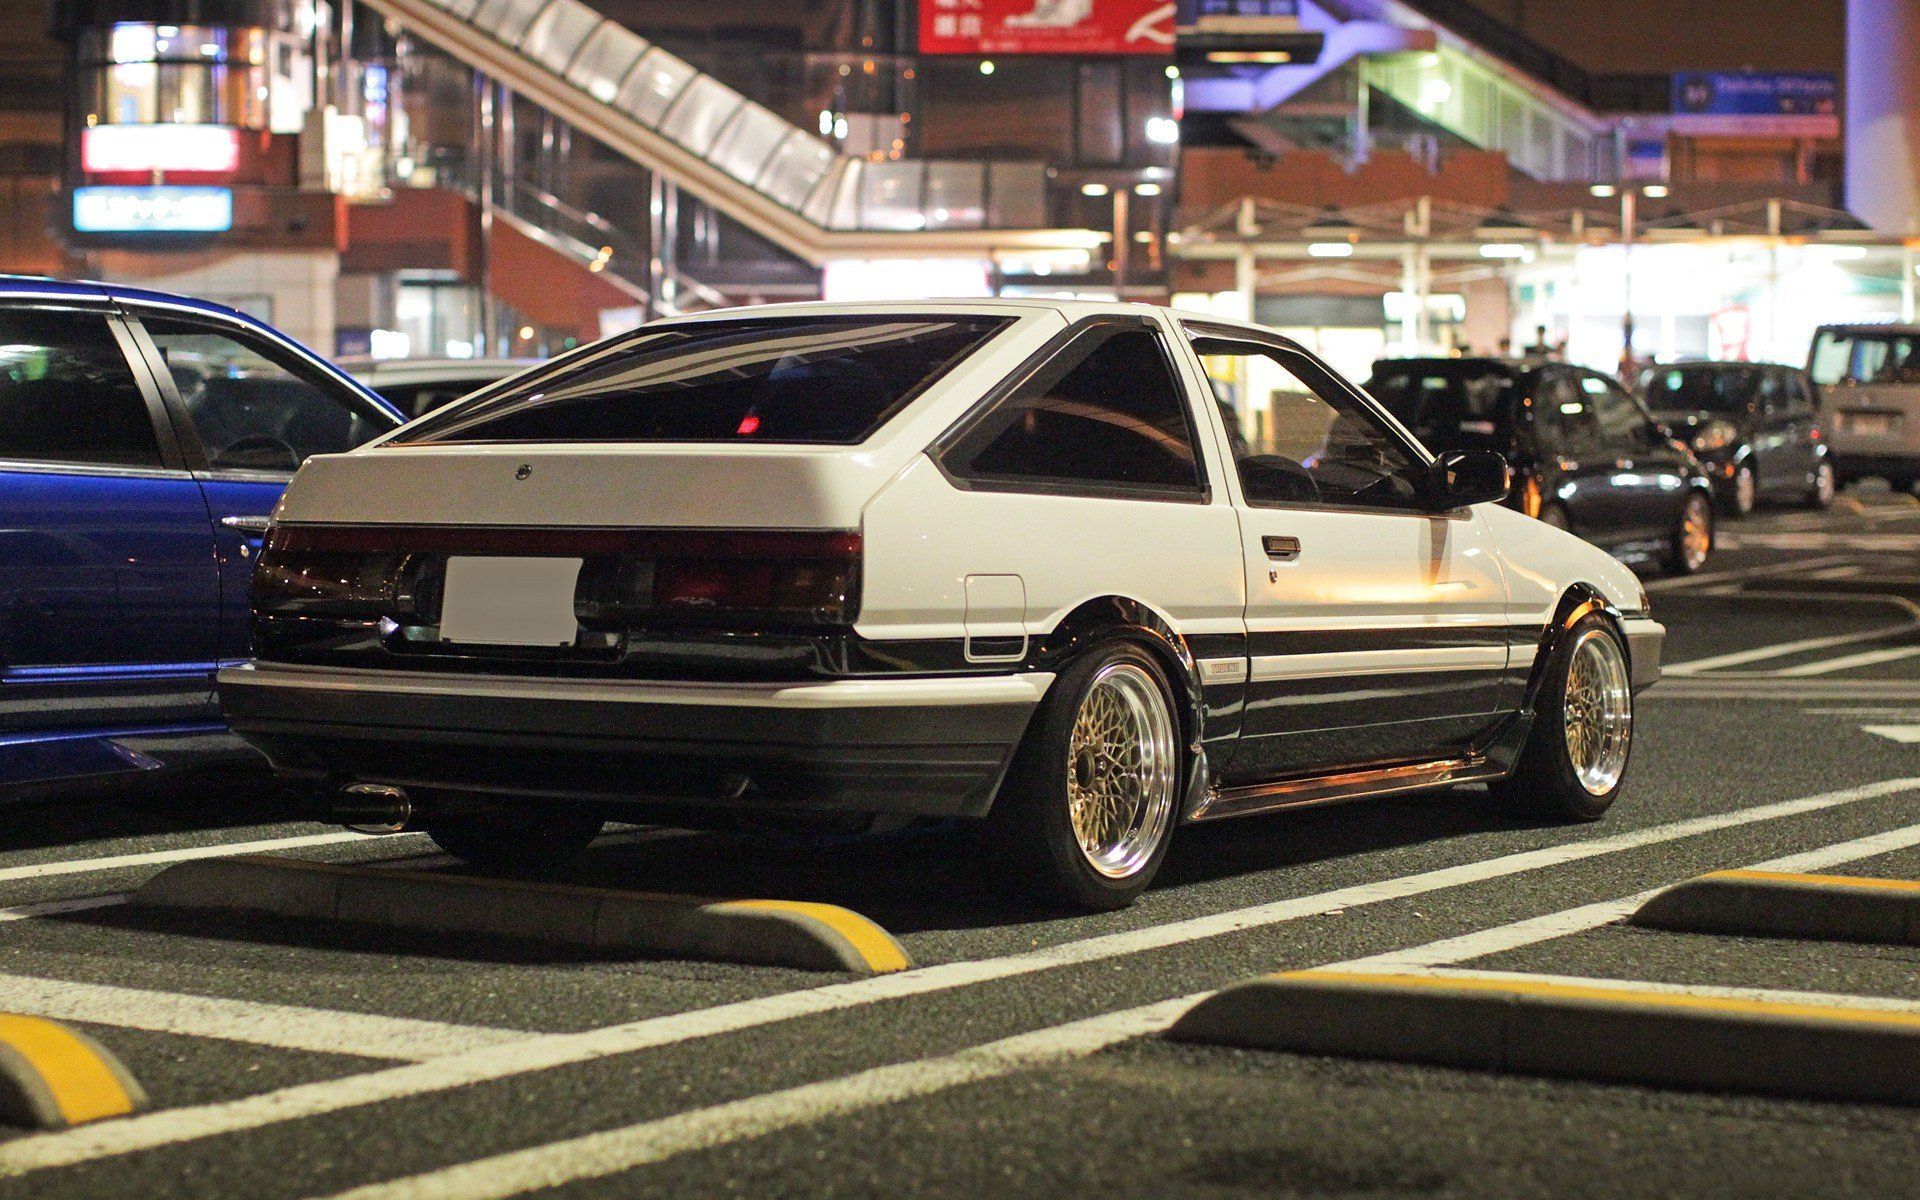 A car parked in the middle of an intersection - Toyota AE86